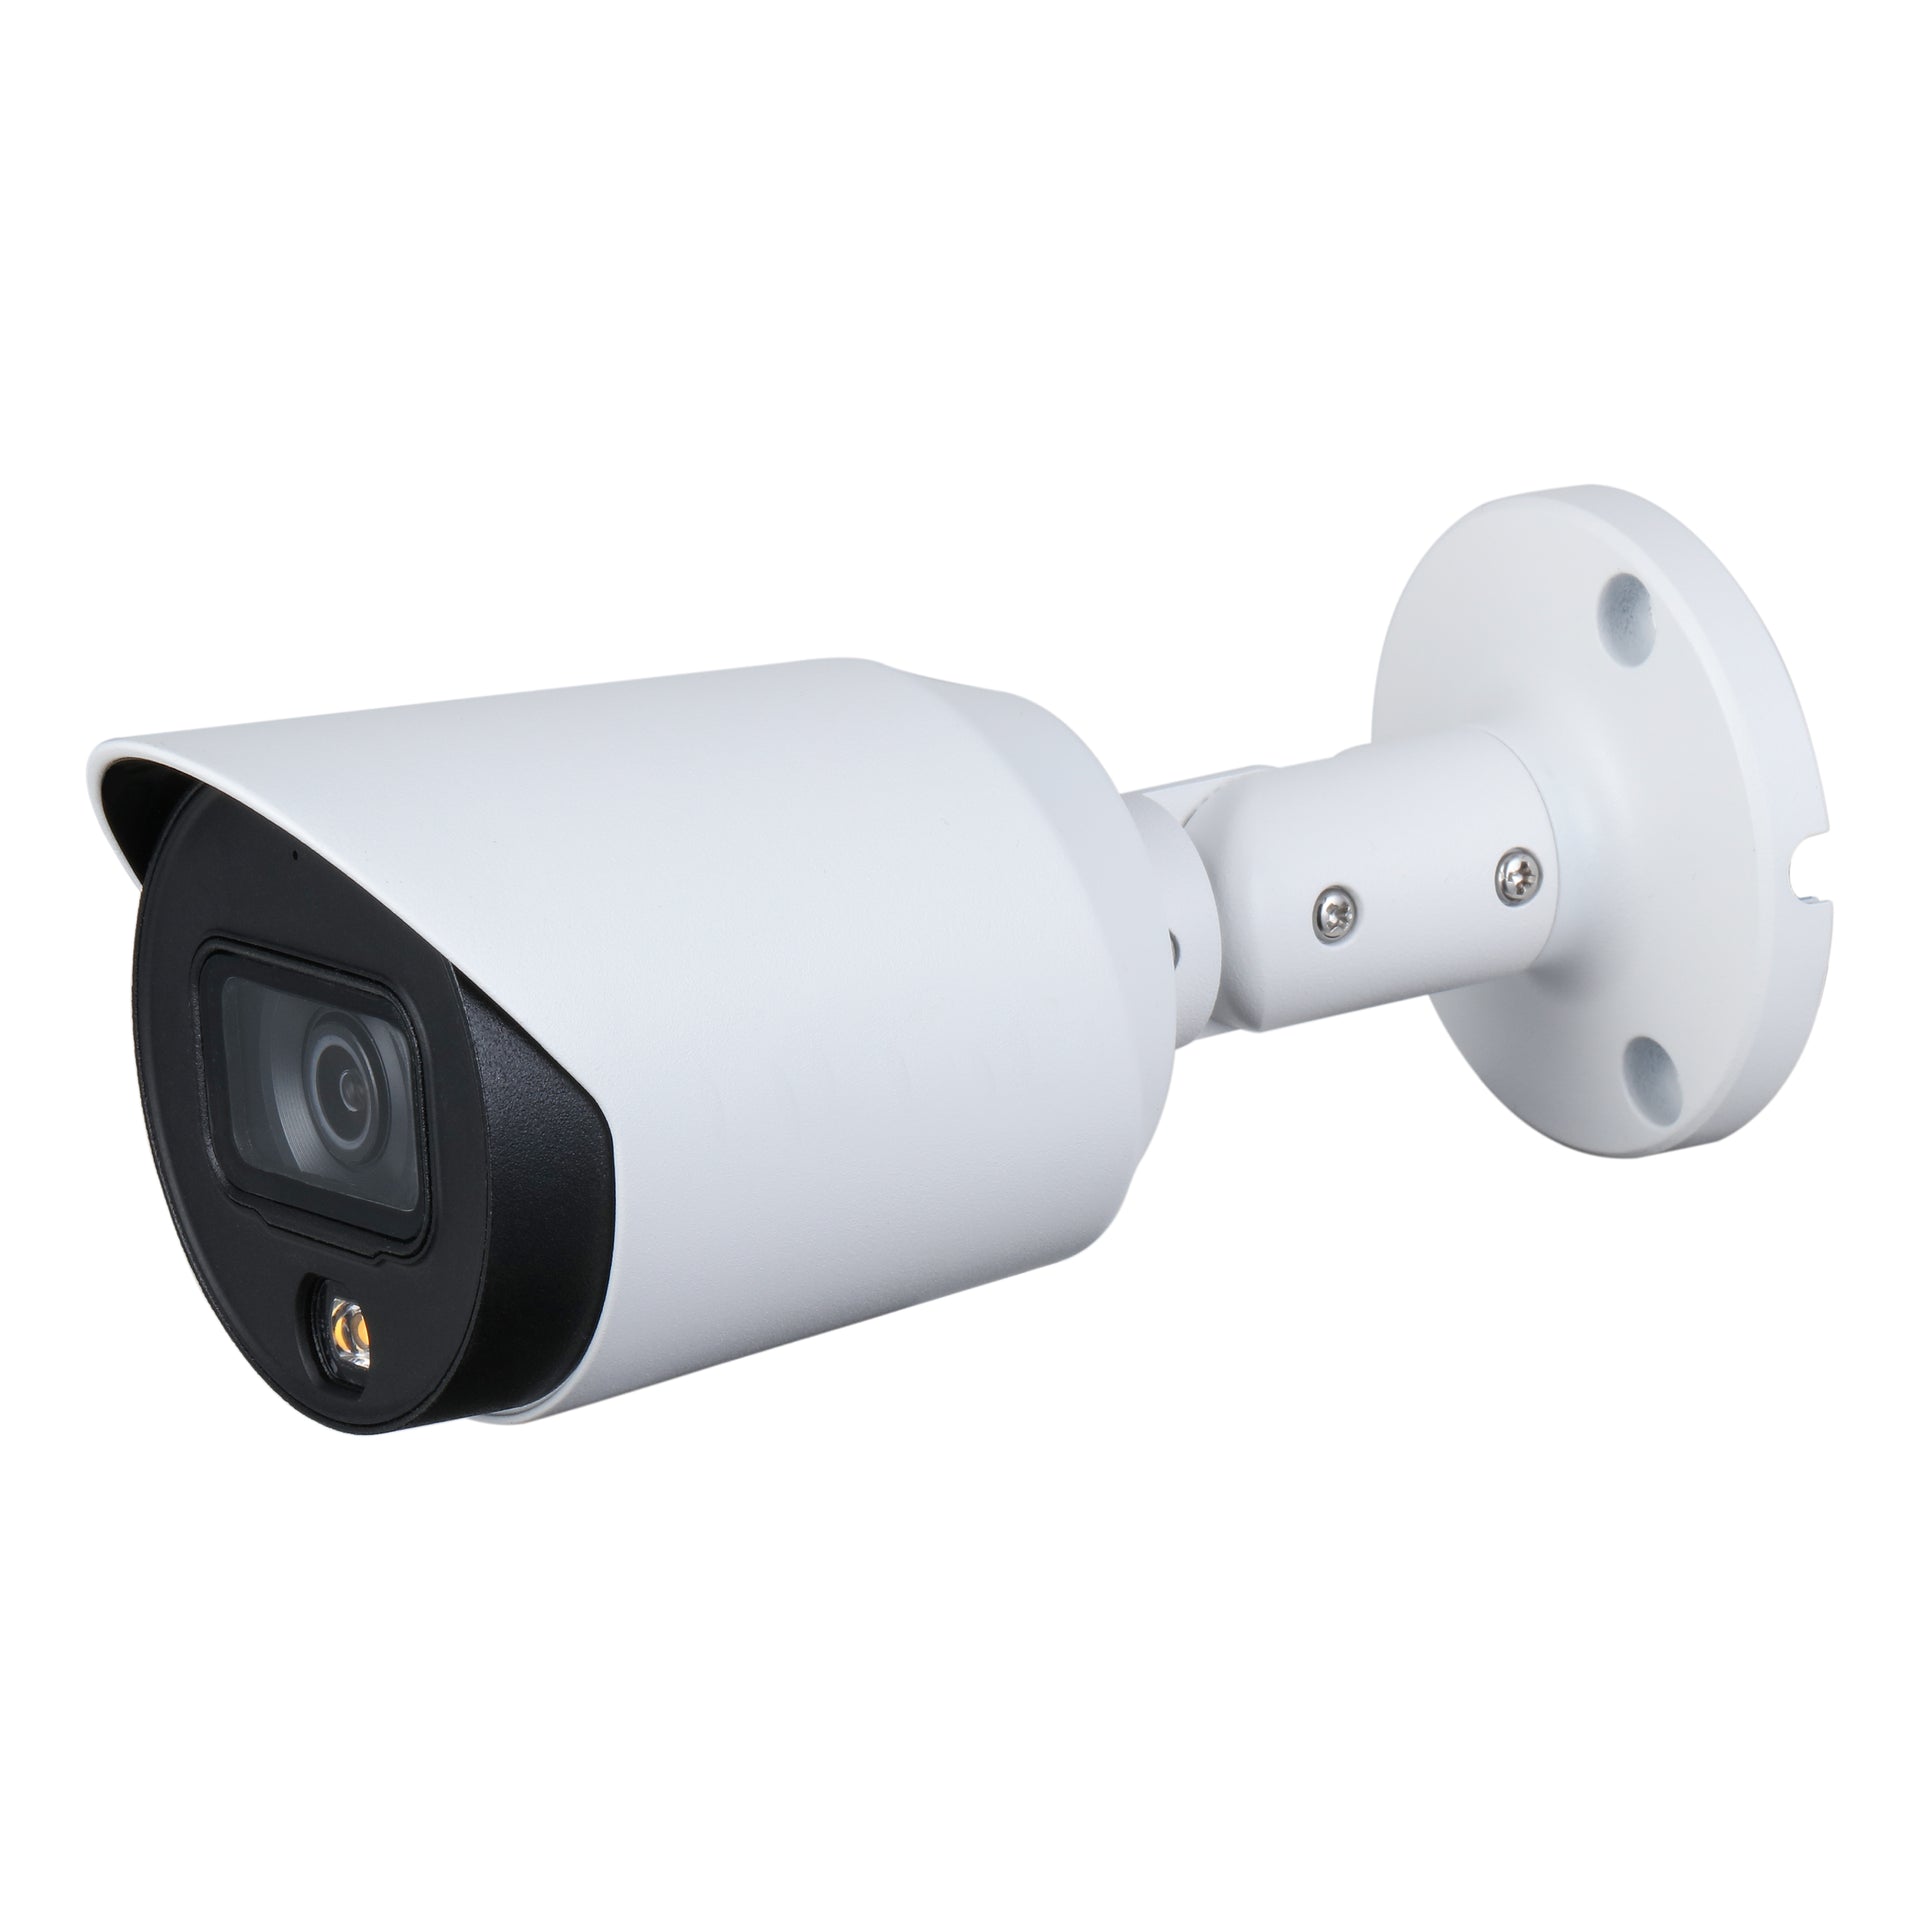 High-definition Analog Security Camera - 8MP(4K) Night Color Vision Side